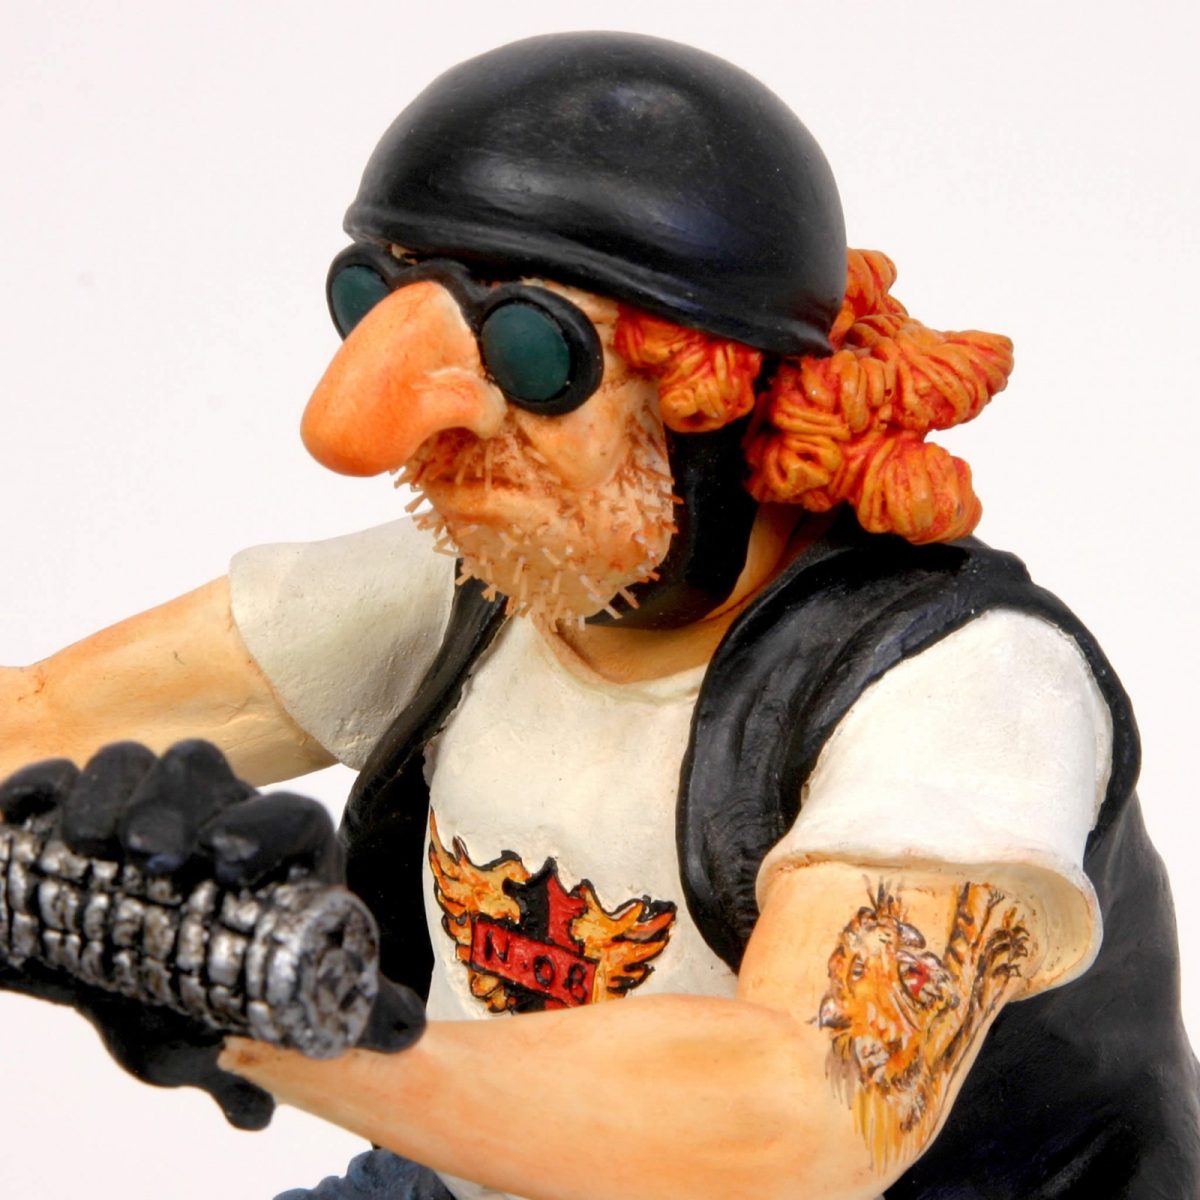 Guillermo Forchino Motorbike Lovers Miniature Figurines Gifts